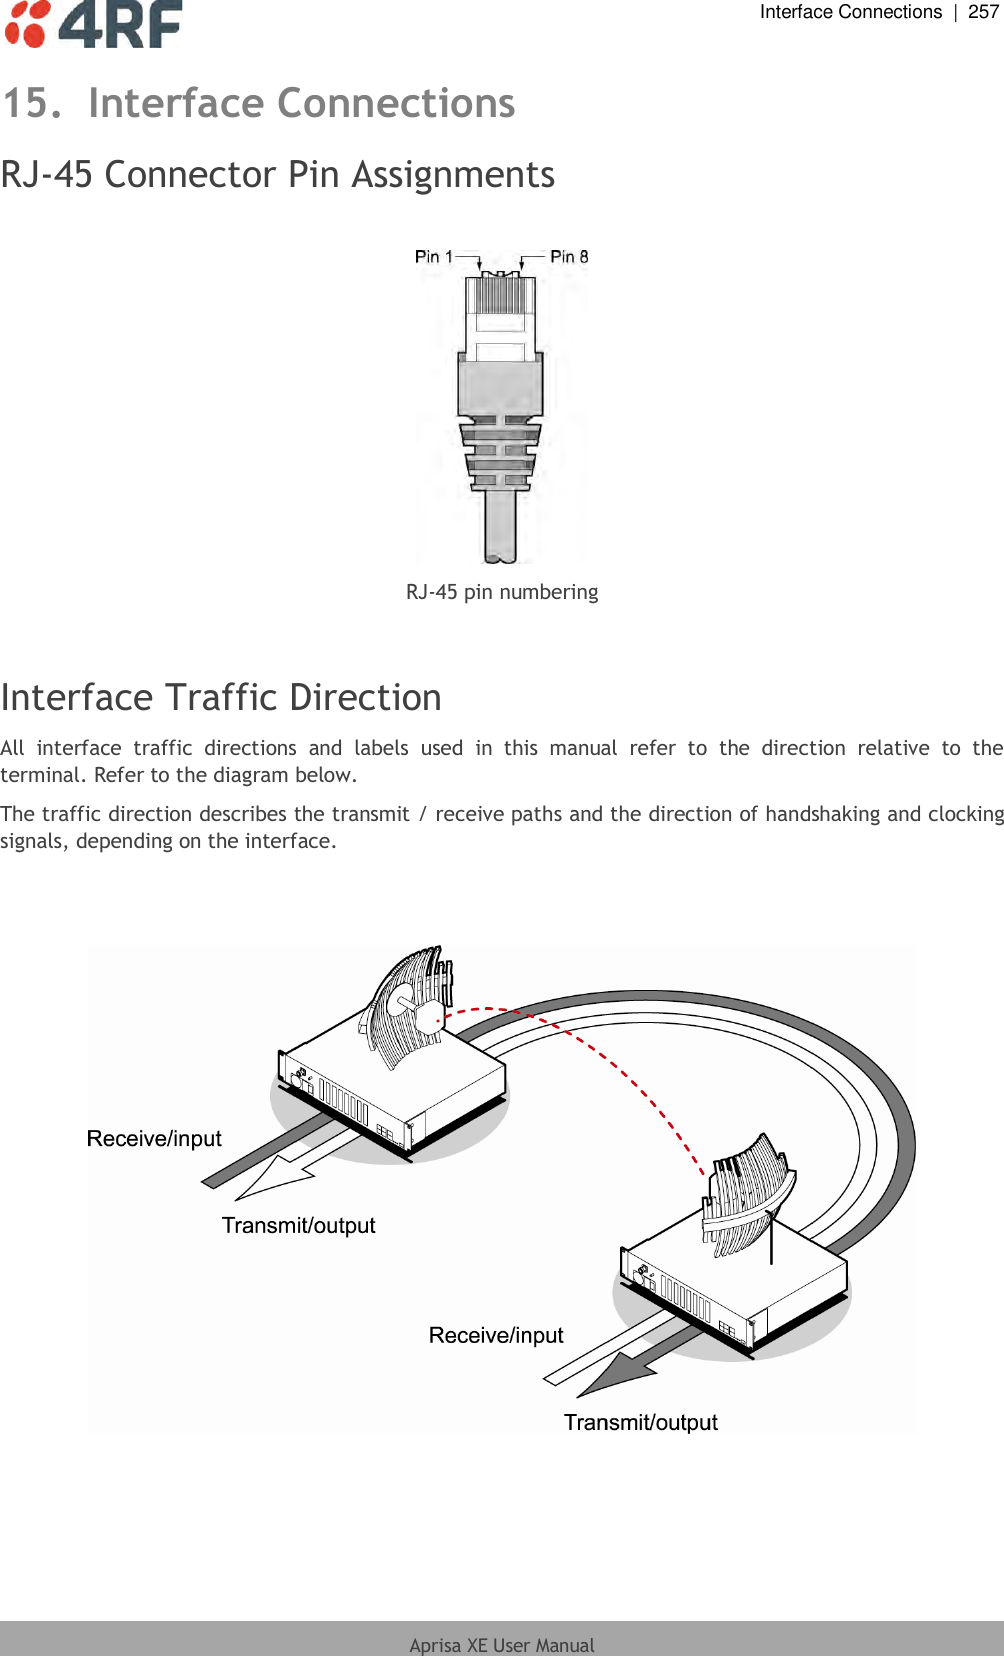  Interface Connections  |  257  Aprisa XE User Manual  15. Interface Connections RJ-45 Connector Pin Assignments   RJ-45 pin numbering   Interface Traffic Direction All  interface  traffic  directions  and  labels  used  in  this  manual  refer  to  the  direction  relative  to  the terminal. Refer to the diagram below. The traffic direction describes the transmit / receive paths and the direction of handshaking and clocking signals, depending on the interface.     